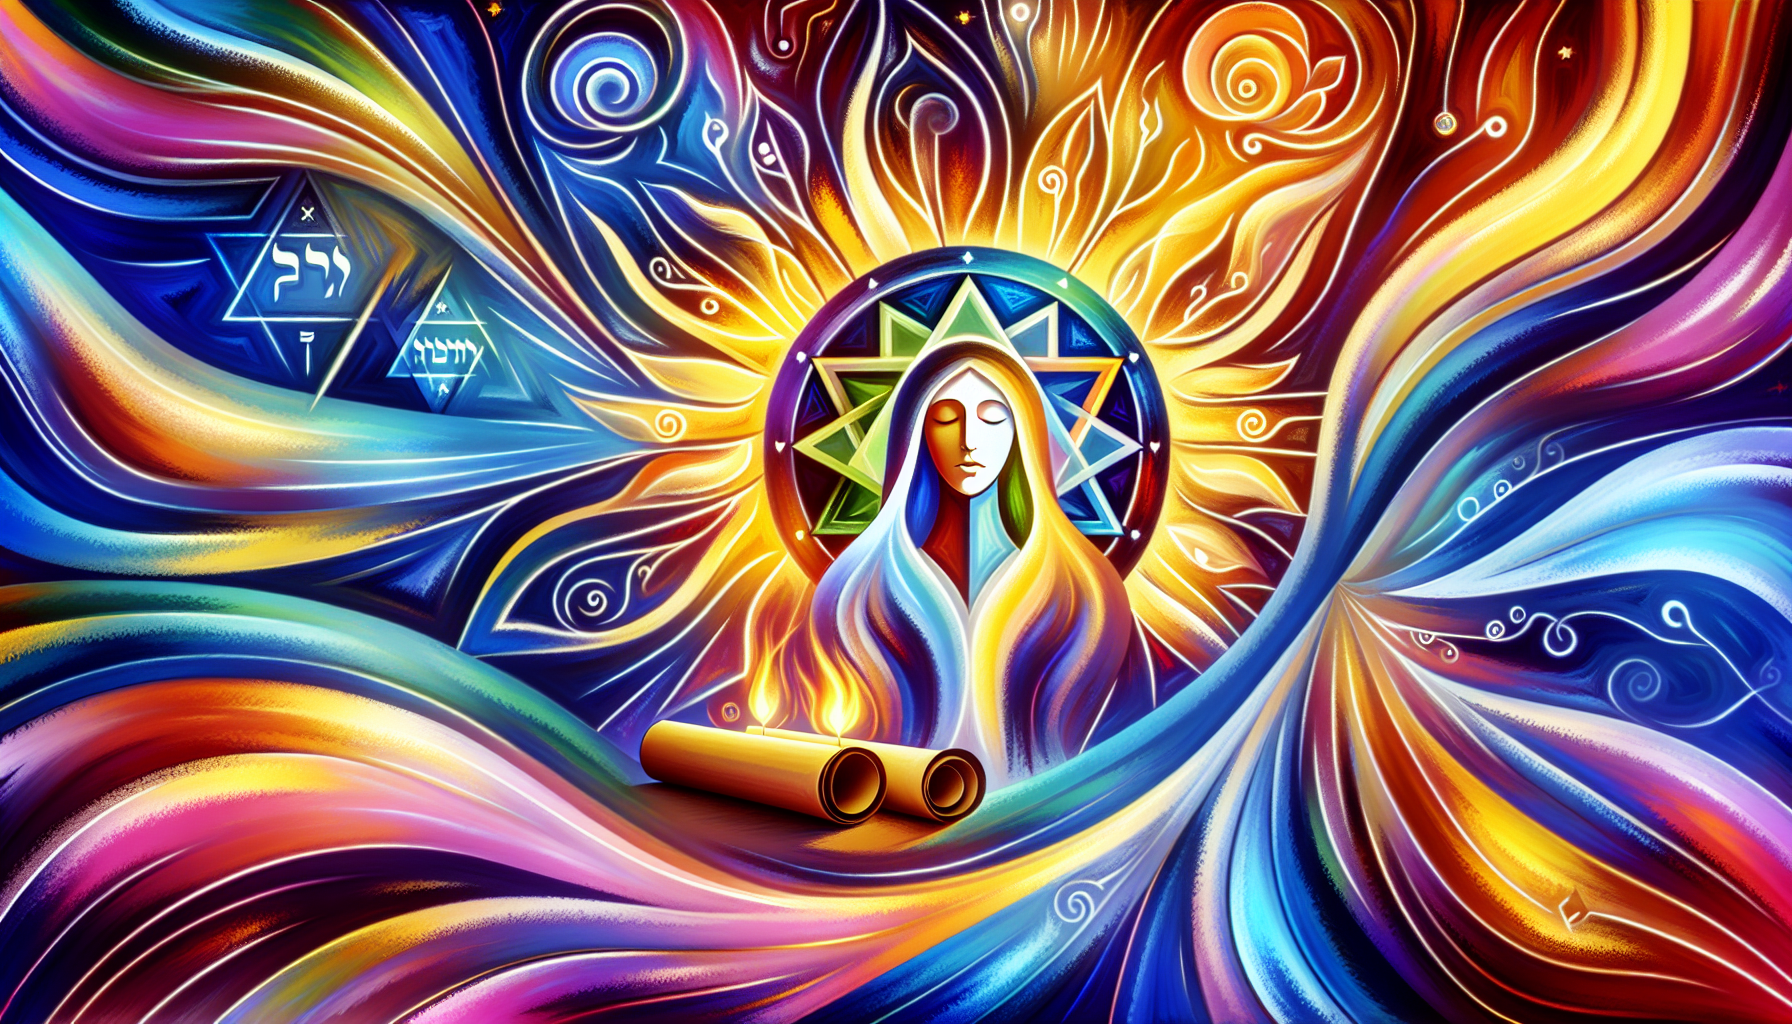 Create an image depicting the spiritual essence of 'Yeshua', blending ancient Hebrew themes with modern interpretations. Include symbolic elements such as scrolls or ancient scriptures, the Star of Da